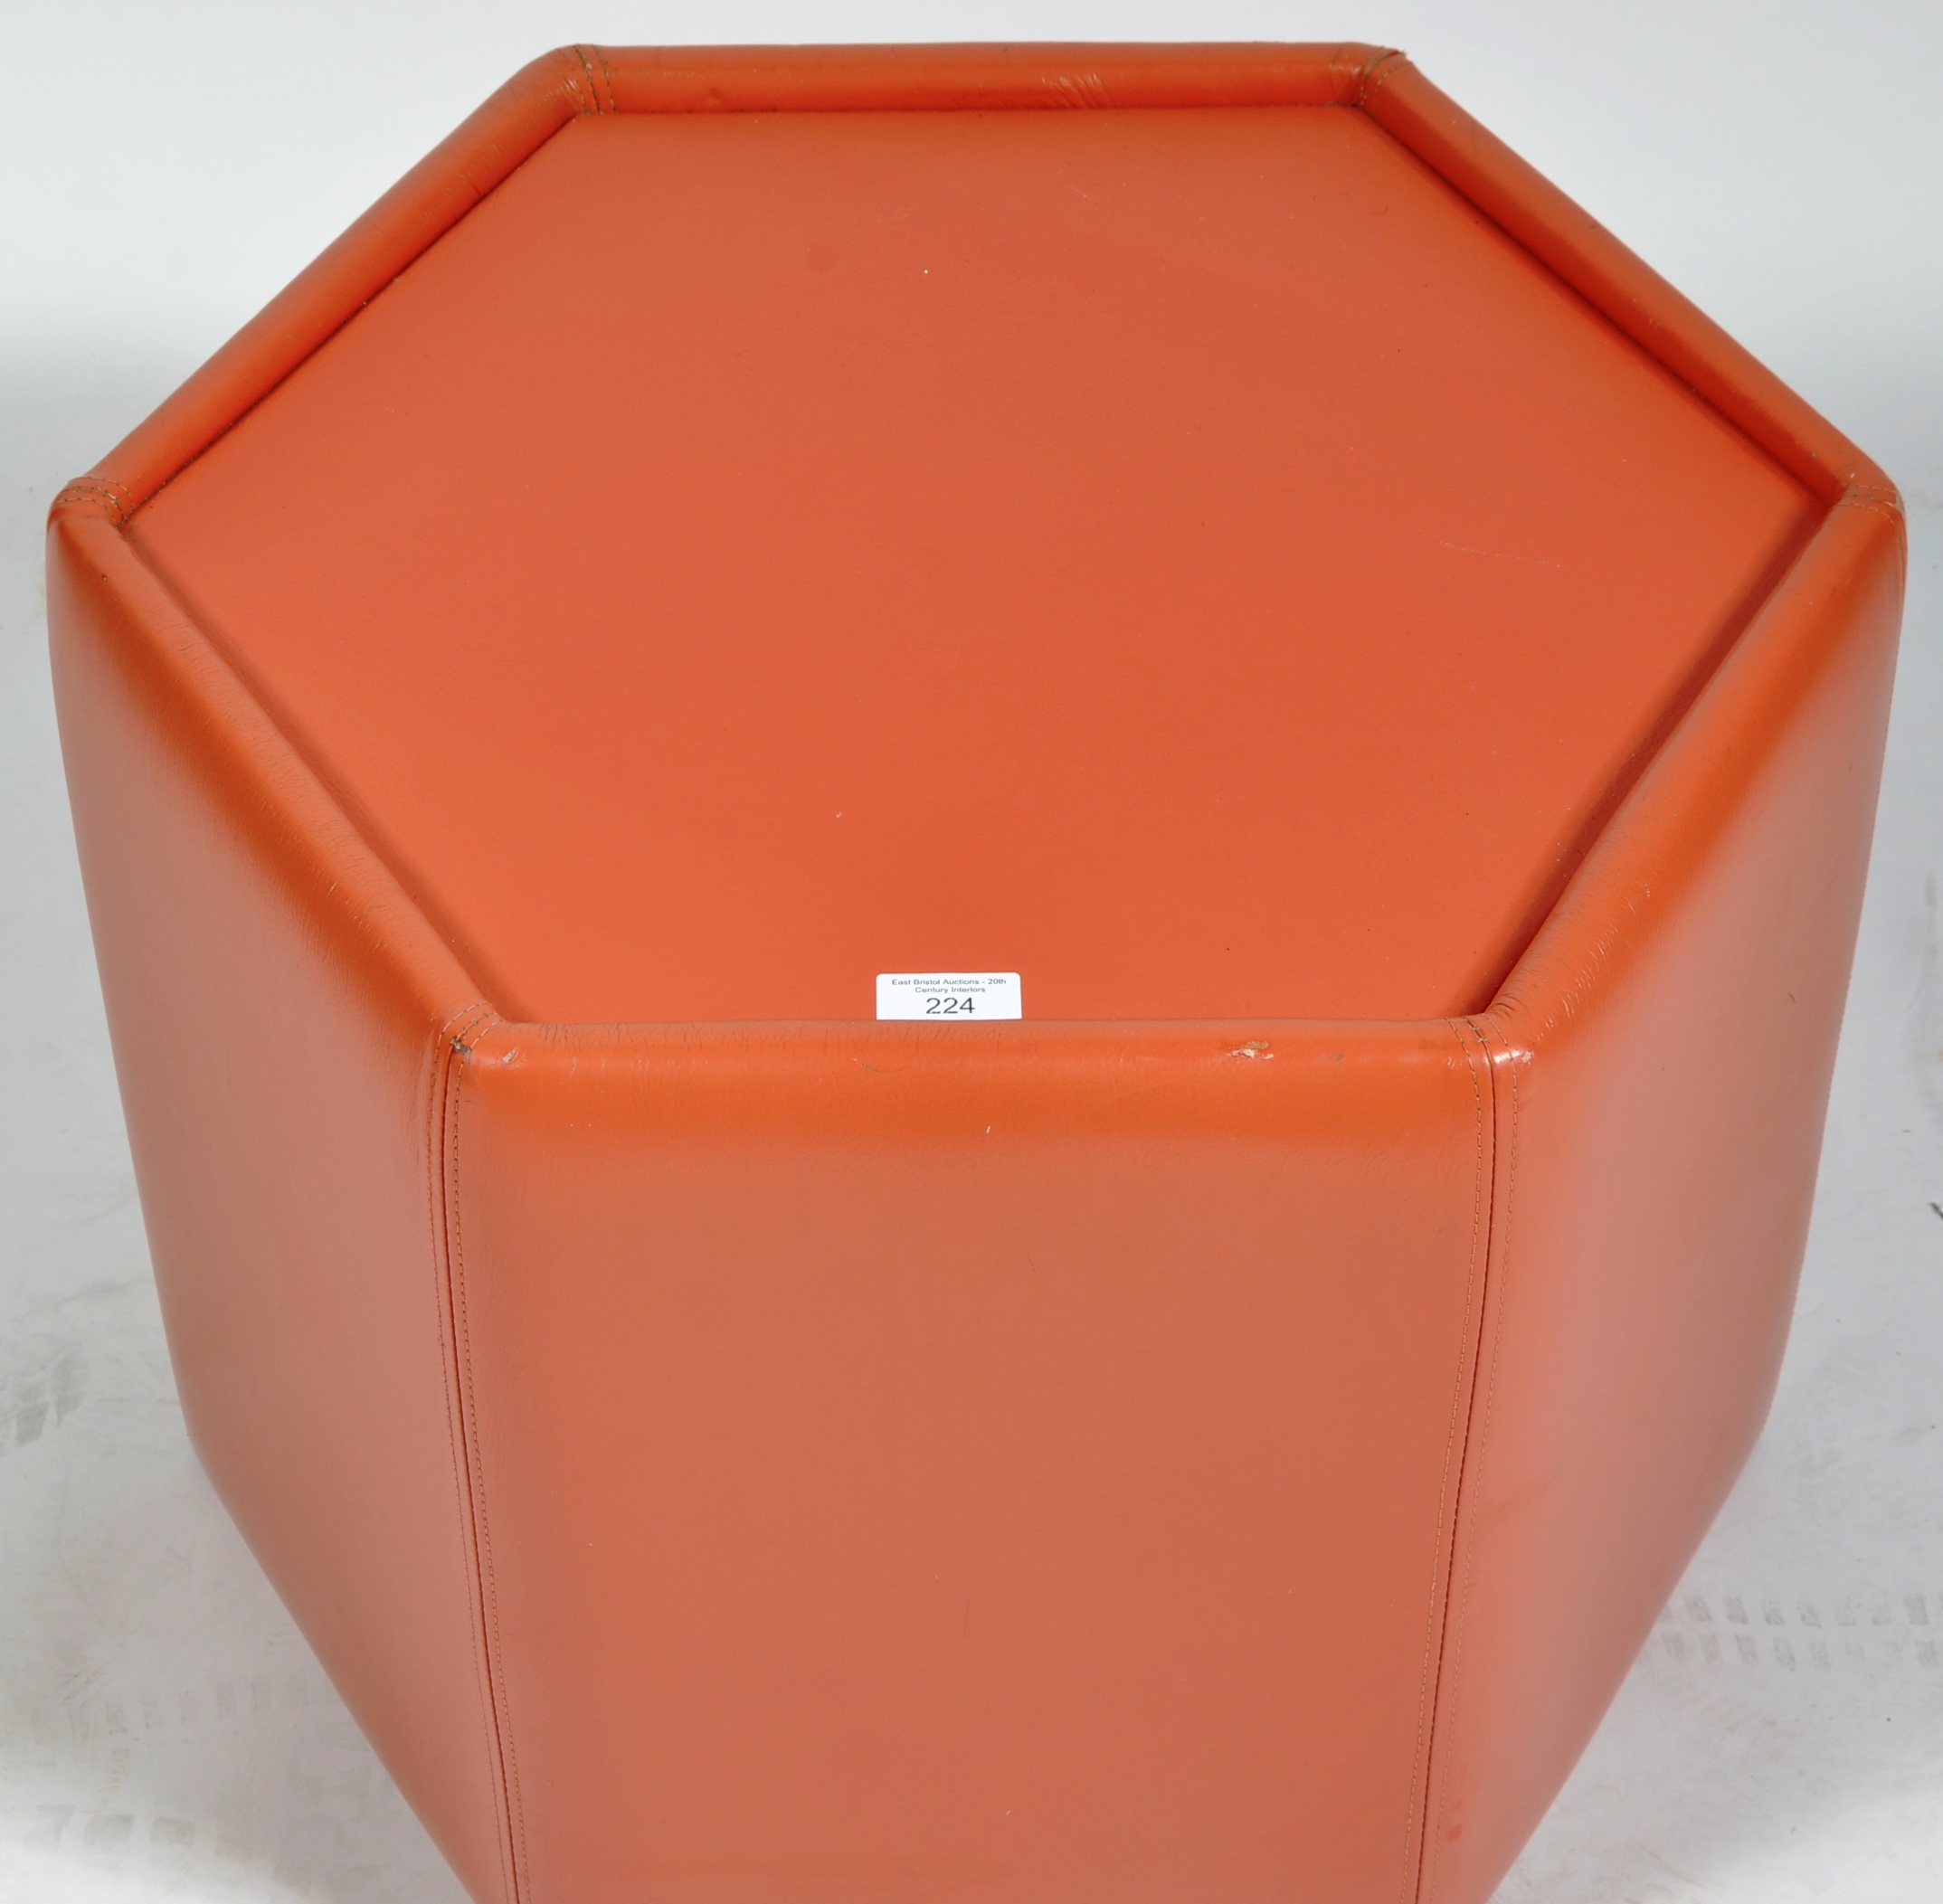 POSSIBLY DE SEDE MID CENTURY OCTAGONAL LEATHER SIDE TABLE - Image 2 of 3